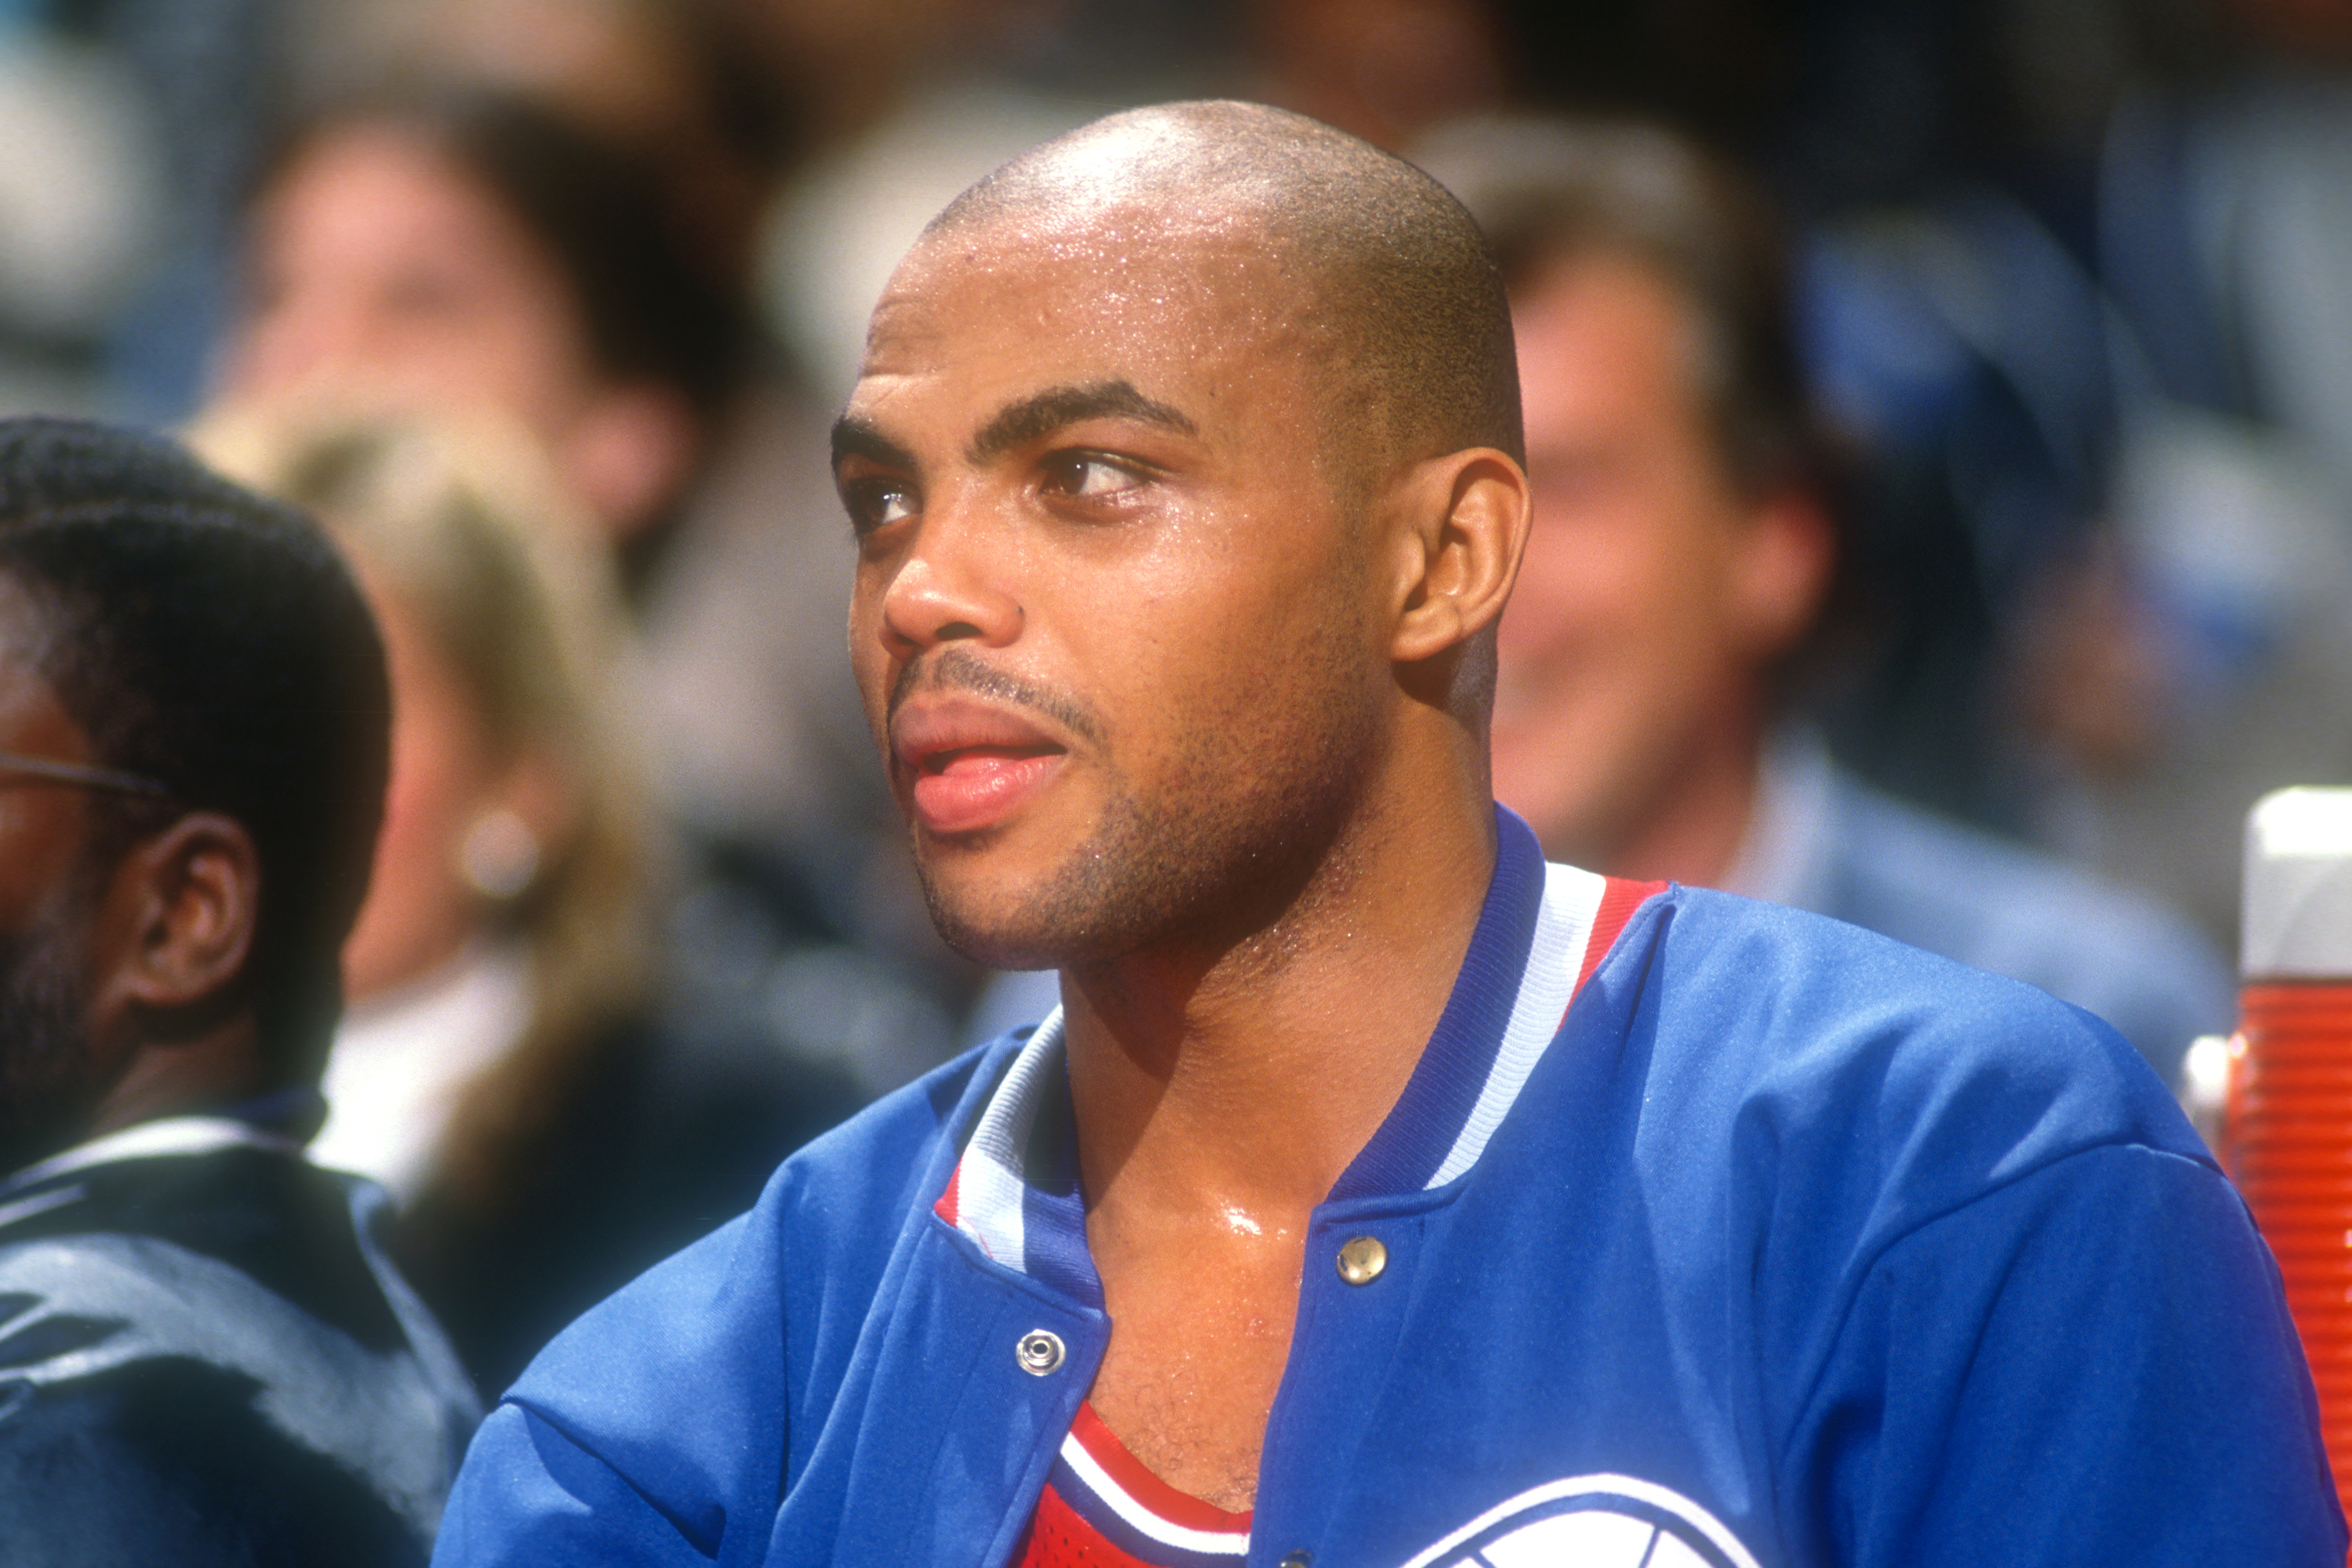 Former Philadelphia 76ers forward Charles Barkley looks on from the bench during a game in 1990.